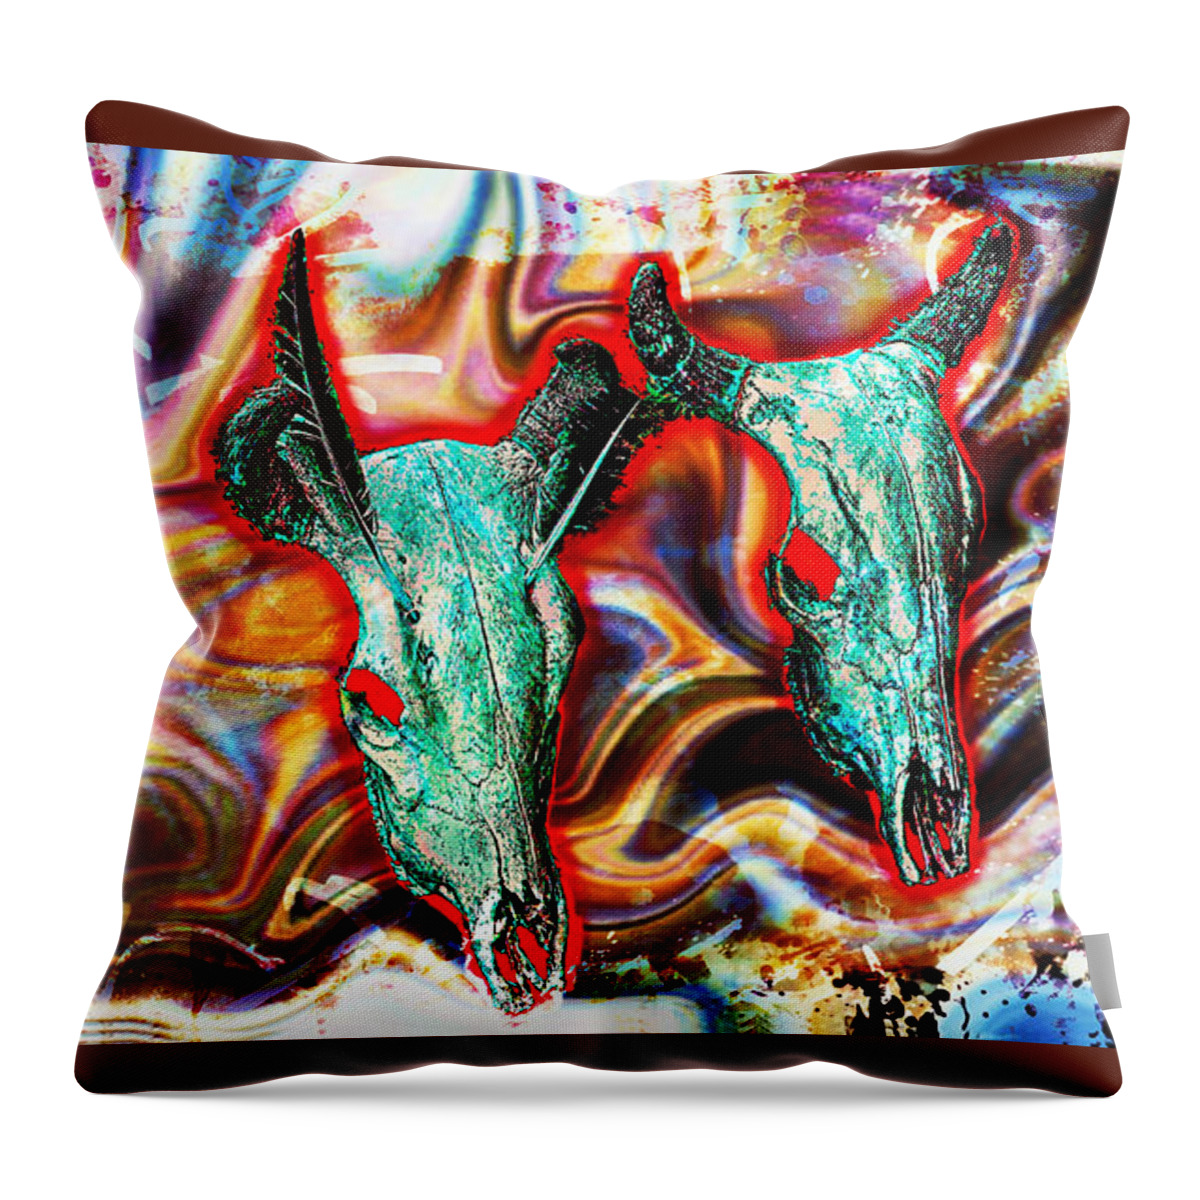 Abstract Throw Pillow featuring the digital art Desert Hallucination by Ian Gledhill